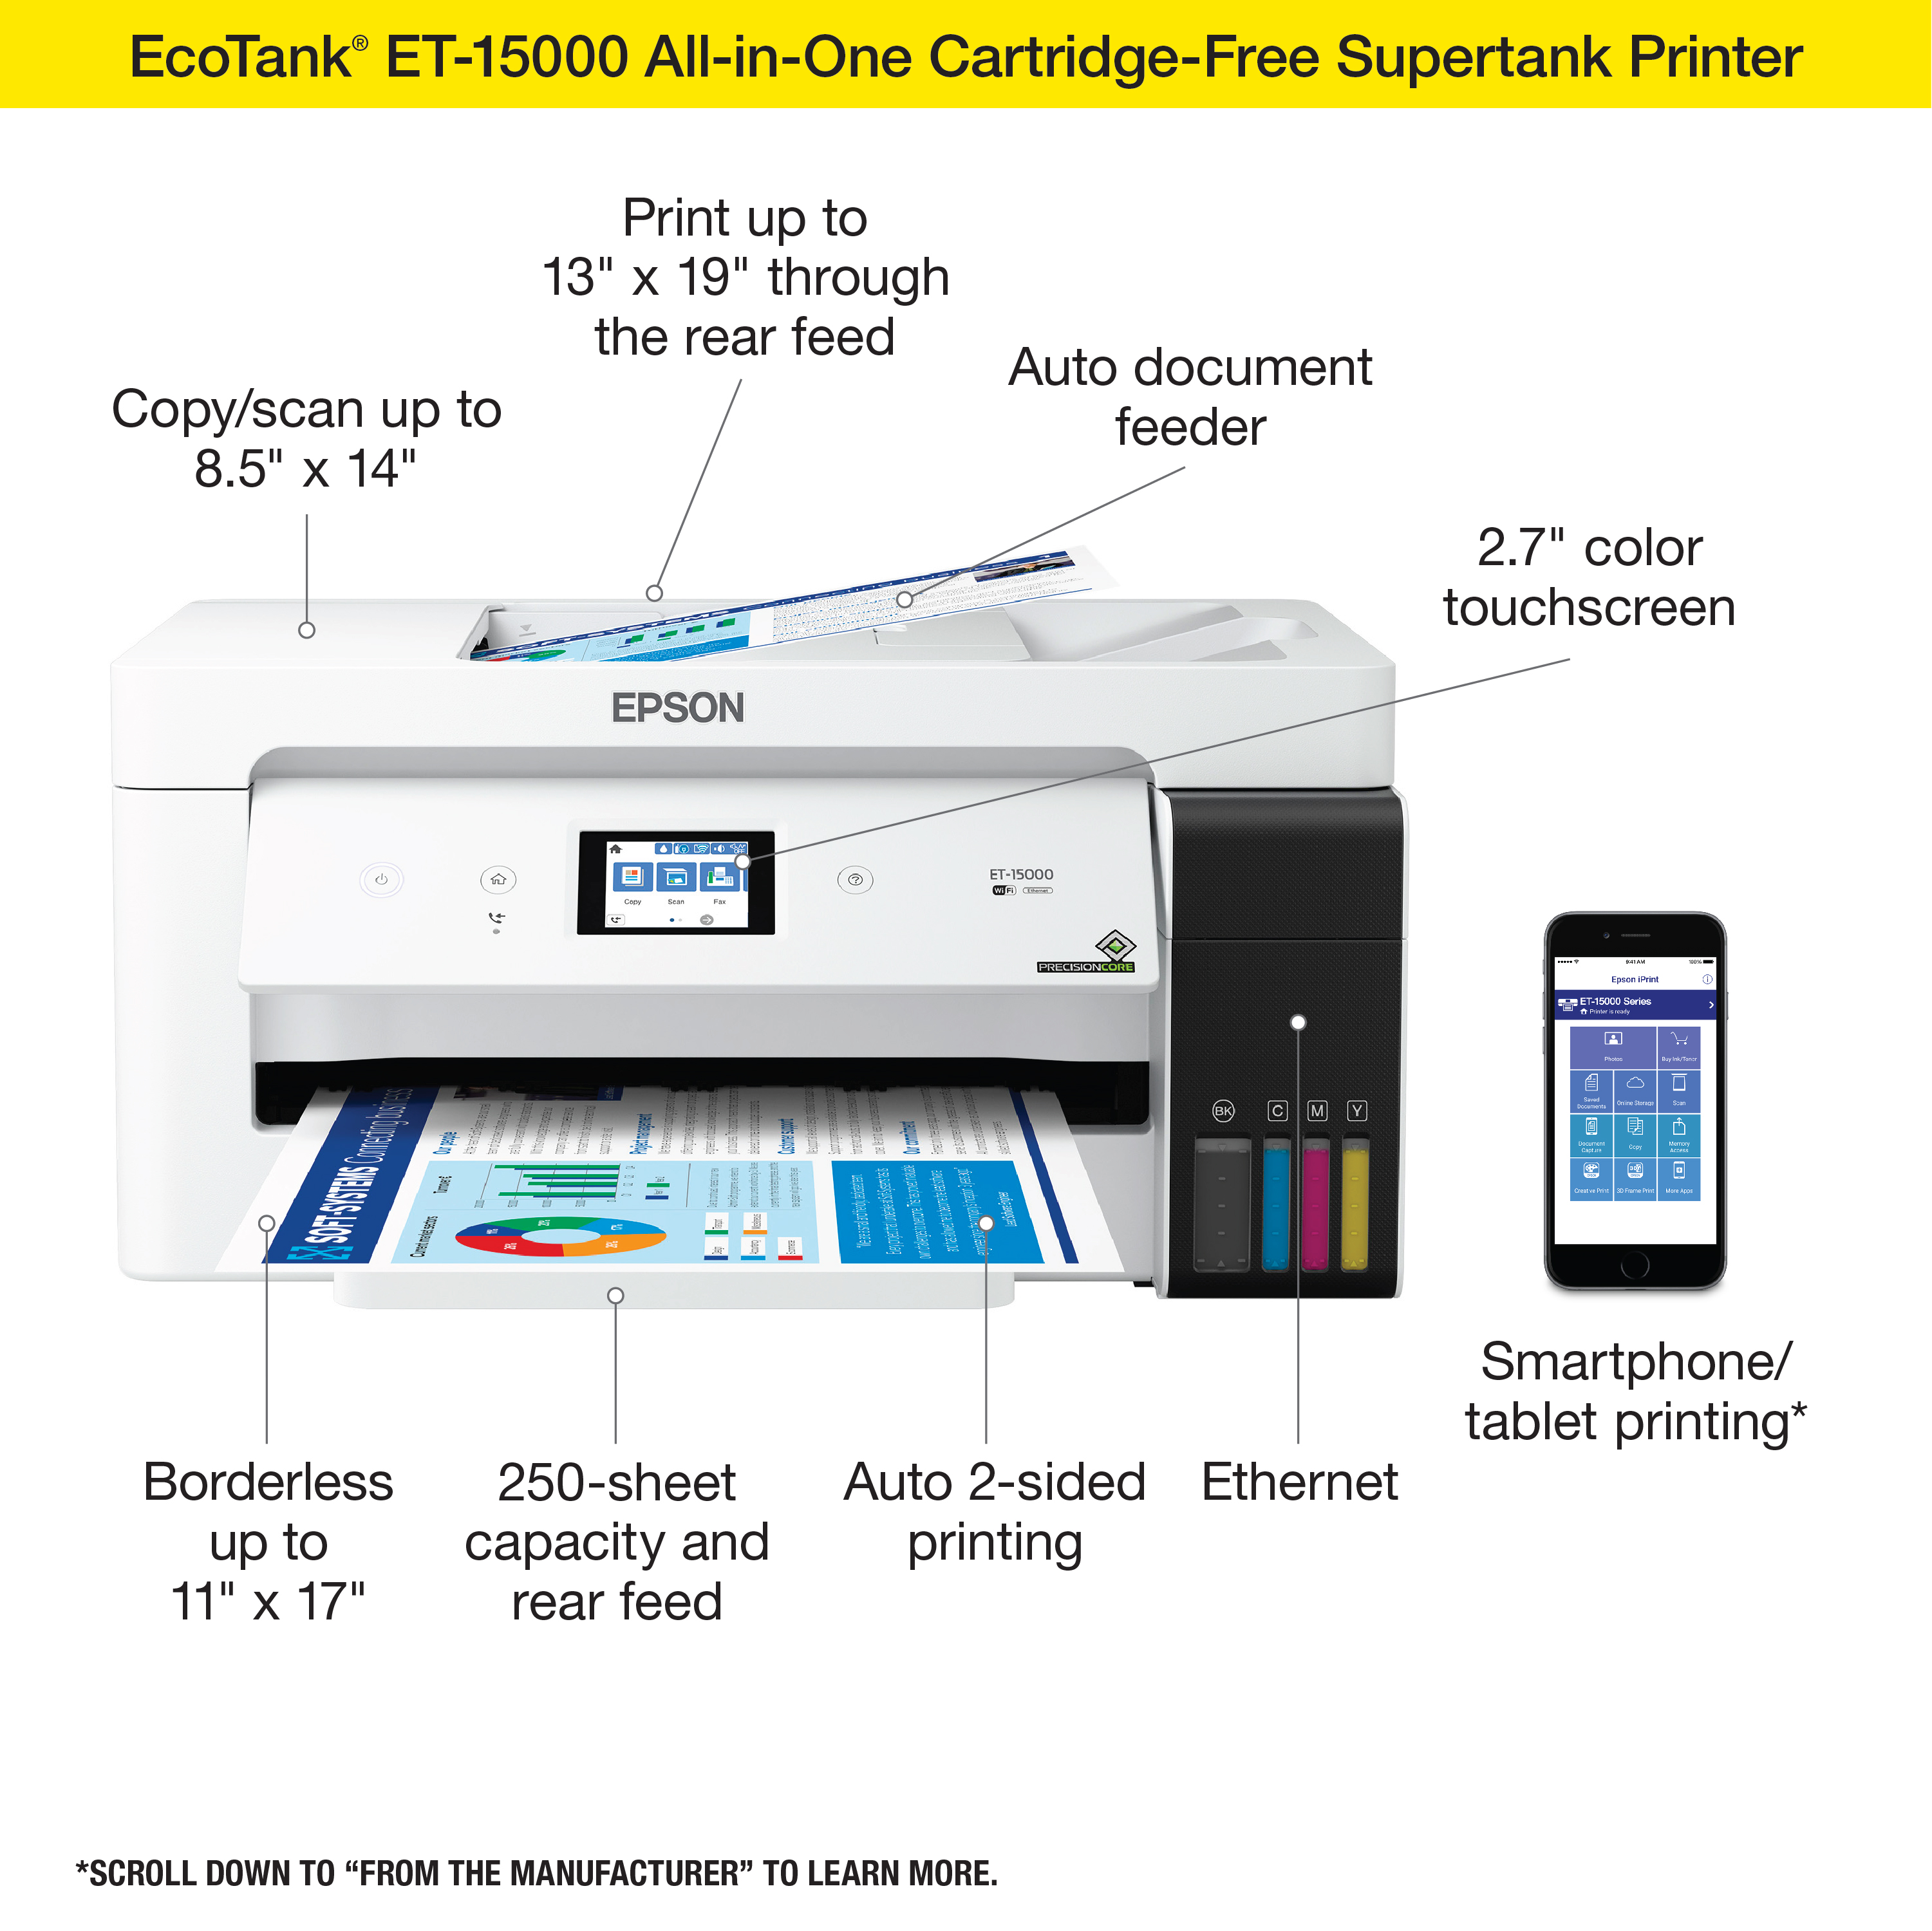 Epson EcoTank ET-15000 Wireless Color All-in-One Supertank Printer with Scanner, Copier, Fax, Ethernet and Printing up to 13 x 19 Inches - image 4 of 6